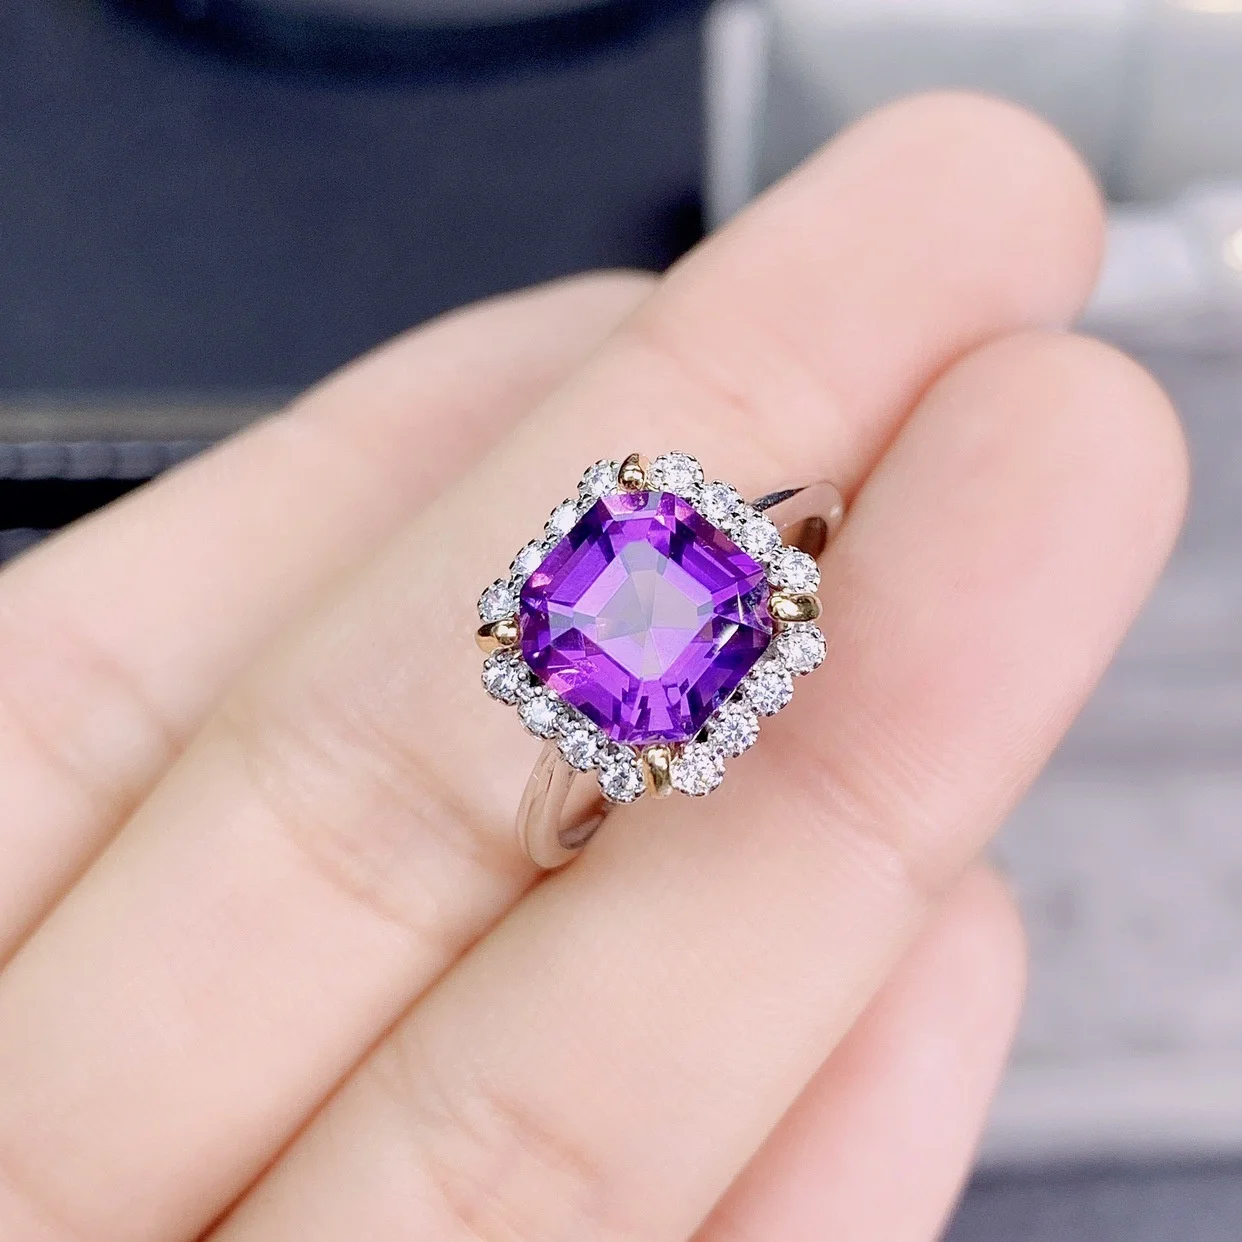 

Chic Square Purple Crystal Amethyst Gemstones Zircon Diamonds Rings for Women White Gold Silver Color Trendy Jewelry Gifts, Picture shows